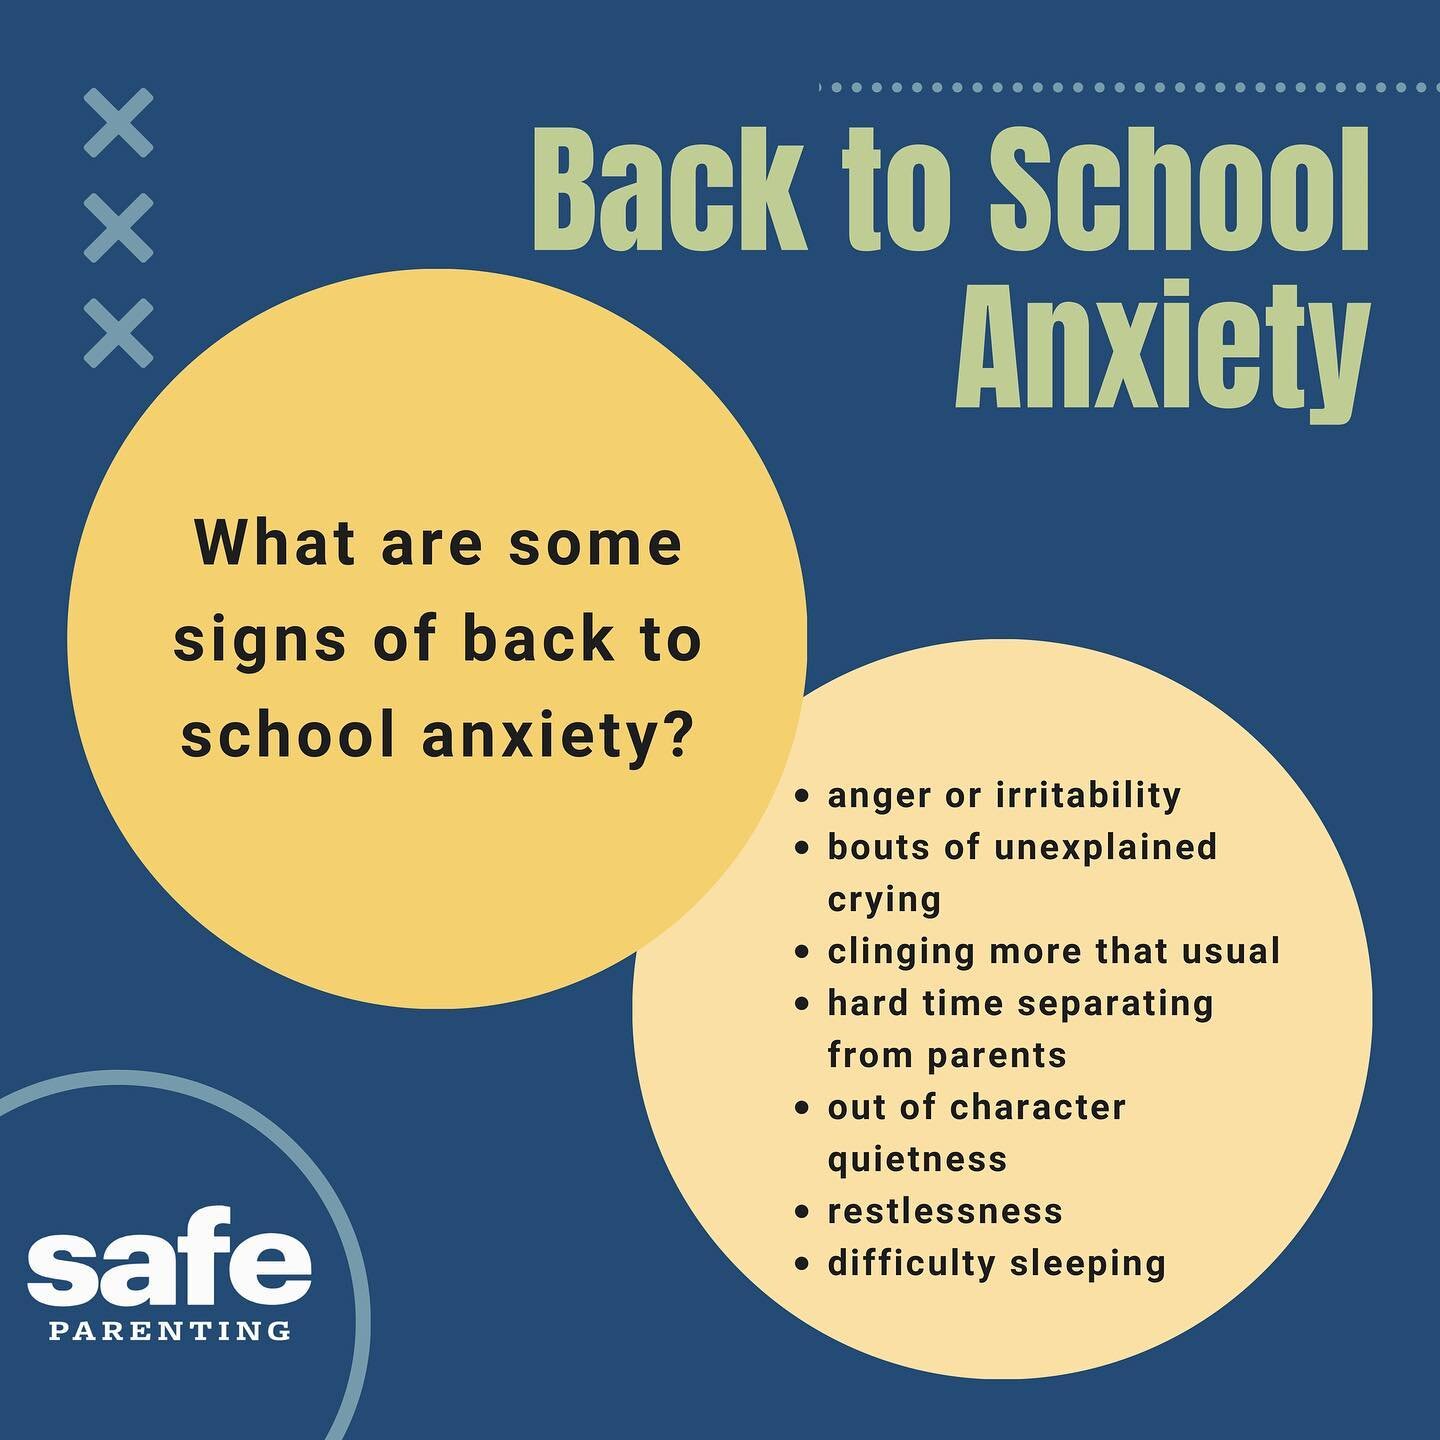 Back to school can be a scary time for kids, and helping them navigate these big feelings can be difficult. Knowing the signs of back to school anxiety and simple ways to help your kids with these feelings can help you set your kids up for a successf